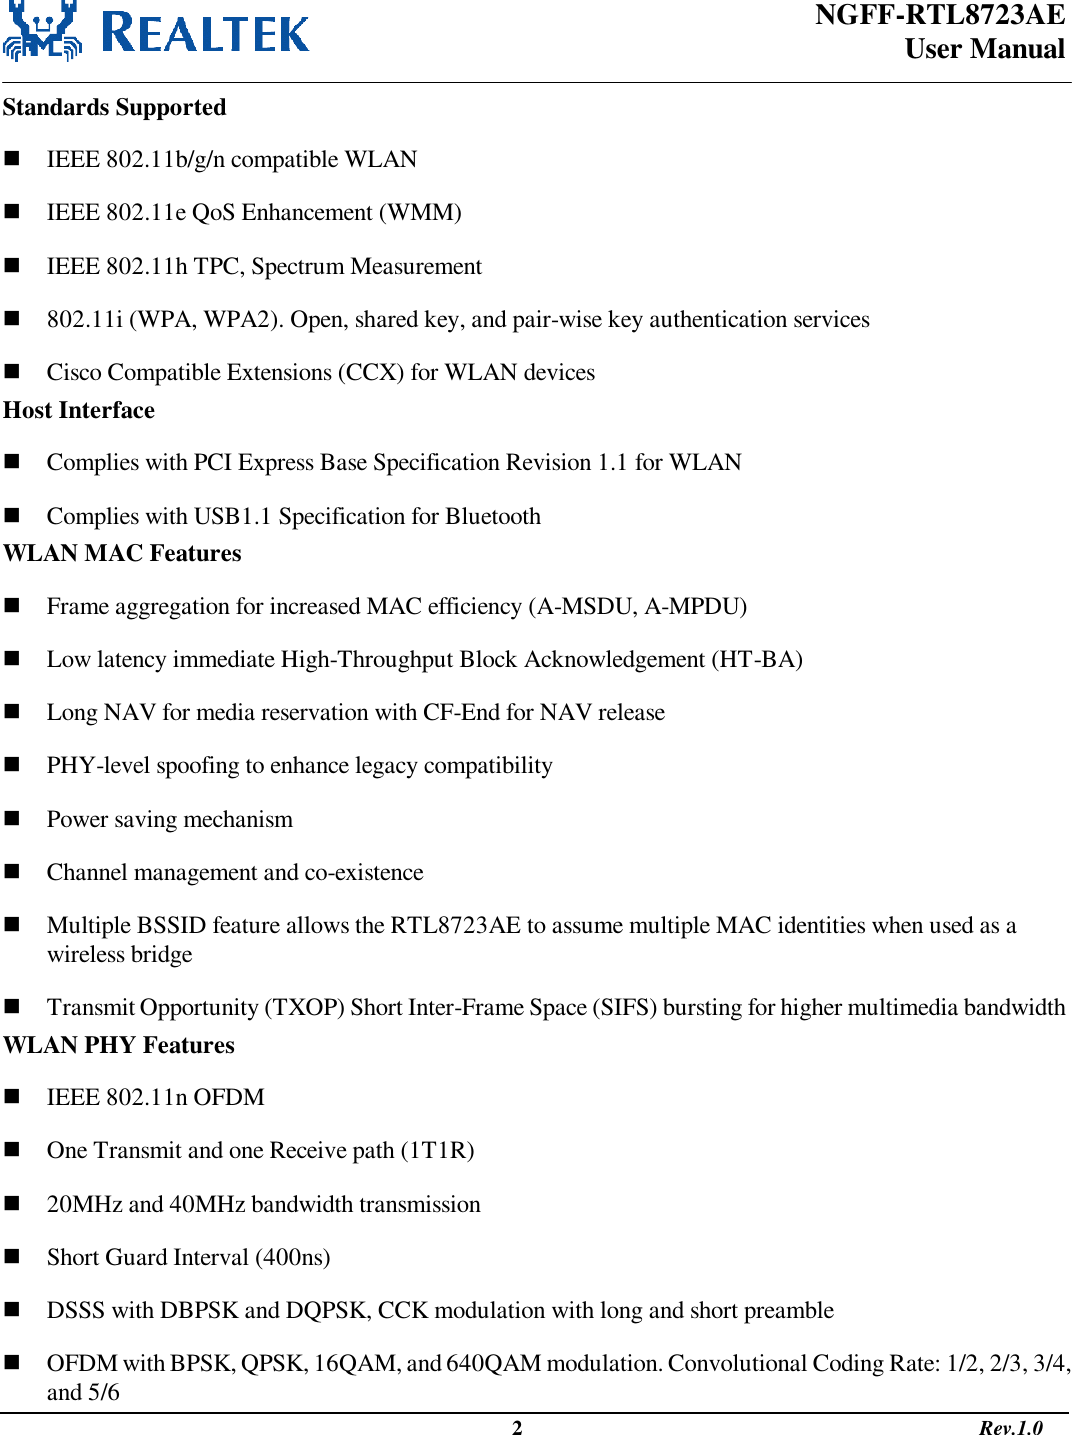 NGFF-RTL8723AE  User Manual                                                                                                  2                                                                                       Rev.1.0  Standards Supported  IEEE 802.11b/g/n compatible WLAN  IEEE 802.11e QoS Enhancement (WMM)  IEEE 802.11h TPC, Spectrum Measurement  802.11i (WPA, WPA2). Open, shared key, and pair-wise key authentication services  Cisco Compatible Extensions (CCX) for WLAN devices Host Interface  Complies with PCI Express Base Specification Revision 1.1 for WLAN  Complies with USB1.1 Specification for Bluetooth WLAN MAC Features  Frame aggregation for increased MAC efficiency (A-MSDU, A-MPDU)  Low latency immediate High-Throughput Block Acknowledgement (HT-BA)  Long NAV for media reservation with CF-End for NAV release  PHY-level spoofing to enhance legacy compatibility  Power saving mechanism  Channel management and co-existence  Multiple BSSID feature allows the RTL8723AE to assume multiple MAC identities when used as a wireless bridge  Transmit Opportunity (TXOP) Short Inter-Frame Space (SIFS) bursting for higher multimedia bandwidth WLAN PHY Features  IEEE 802.11n OFDM  One Transmit and one Receive path (1T1R)  20MHz and 40MHz bandwidth transmission  Short Guard Interval (400ns)  DSSS with DBPSK and DQPSK, CCK modulation with long and short preamble  OFDM with BPSK, QPSK, 16QAM, and 640QAM modulation. Convolutional Coding Rate: 1/2, 2/3, 3/4, and 5/6 